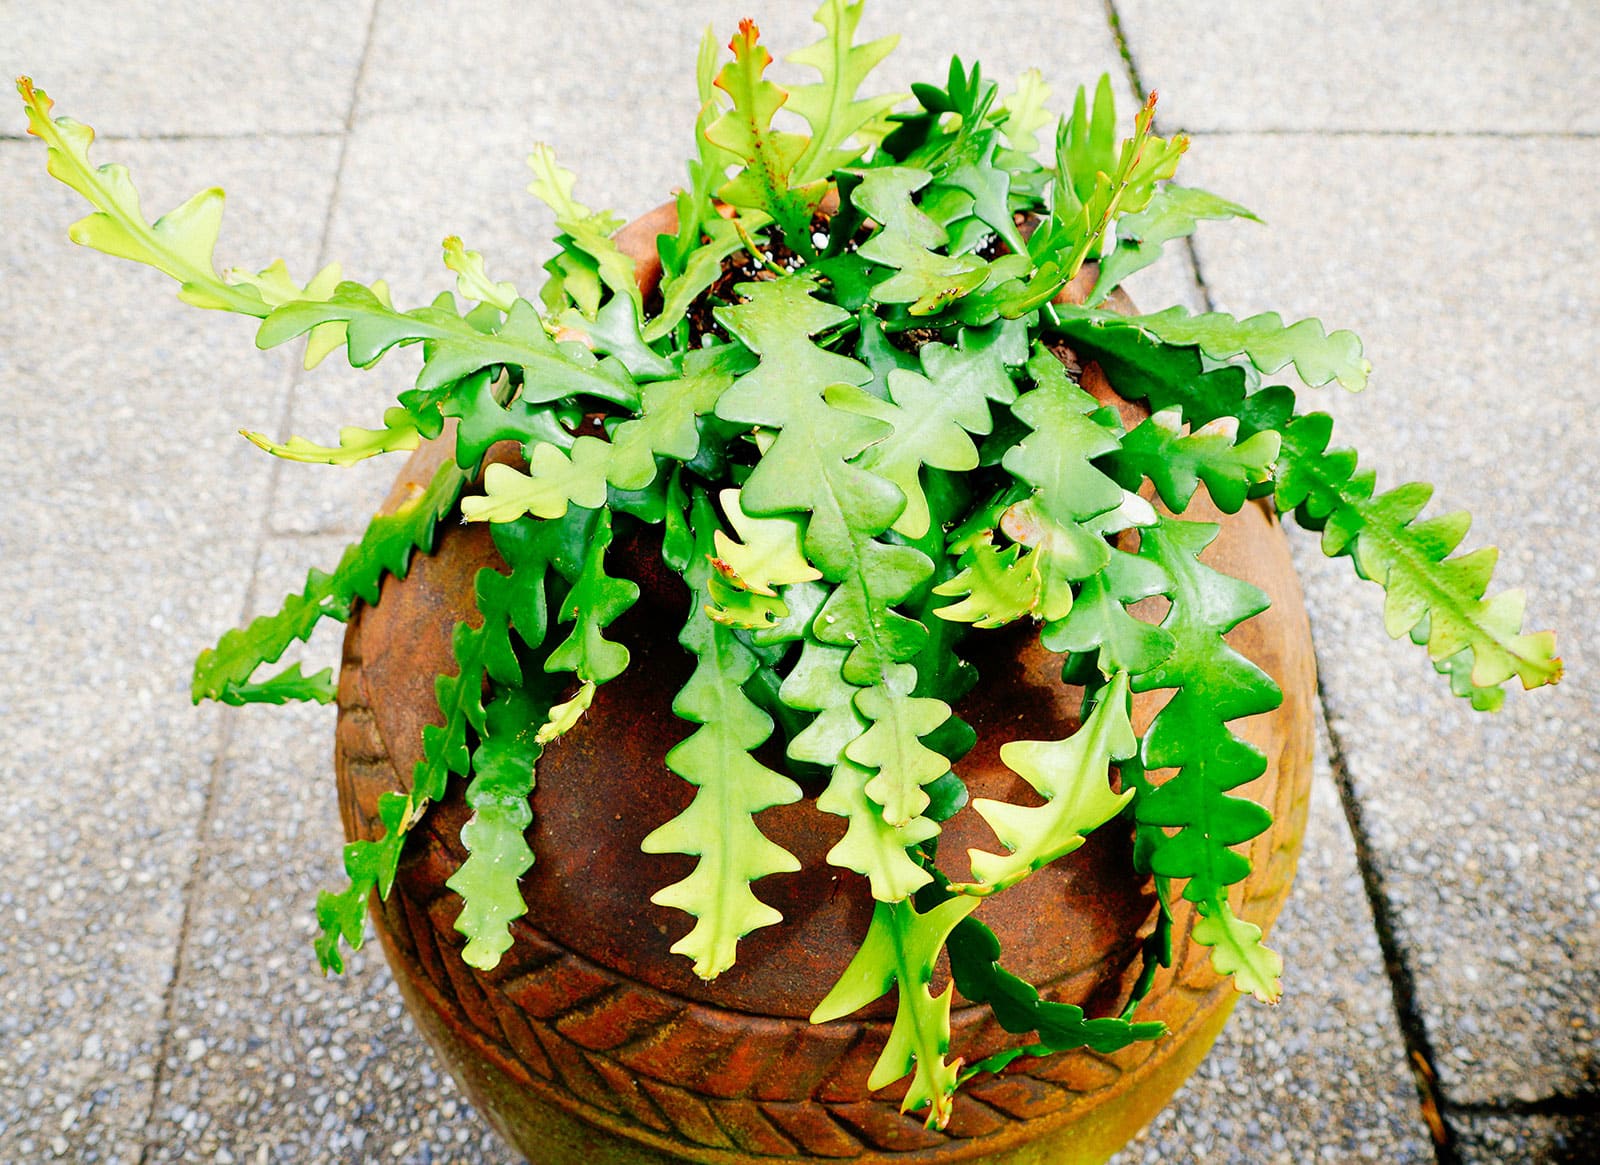 Disocactus anguliger (ric-rac cactus) with many large segmented leaves in a brown terra cotta pot on a concrete floor